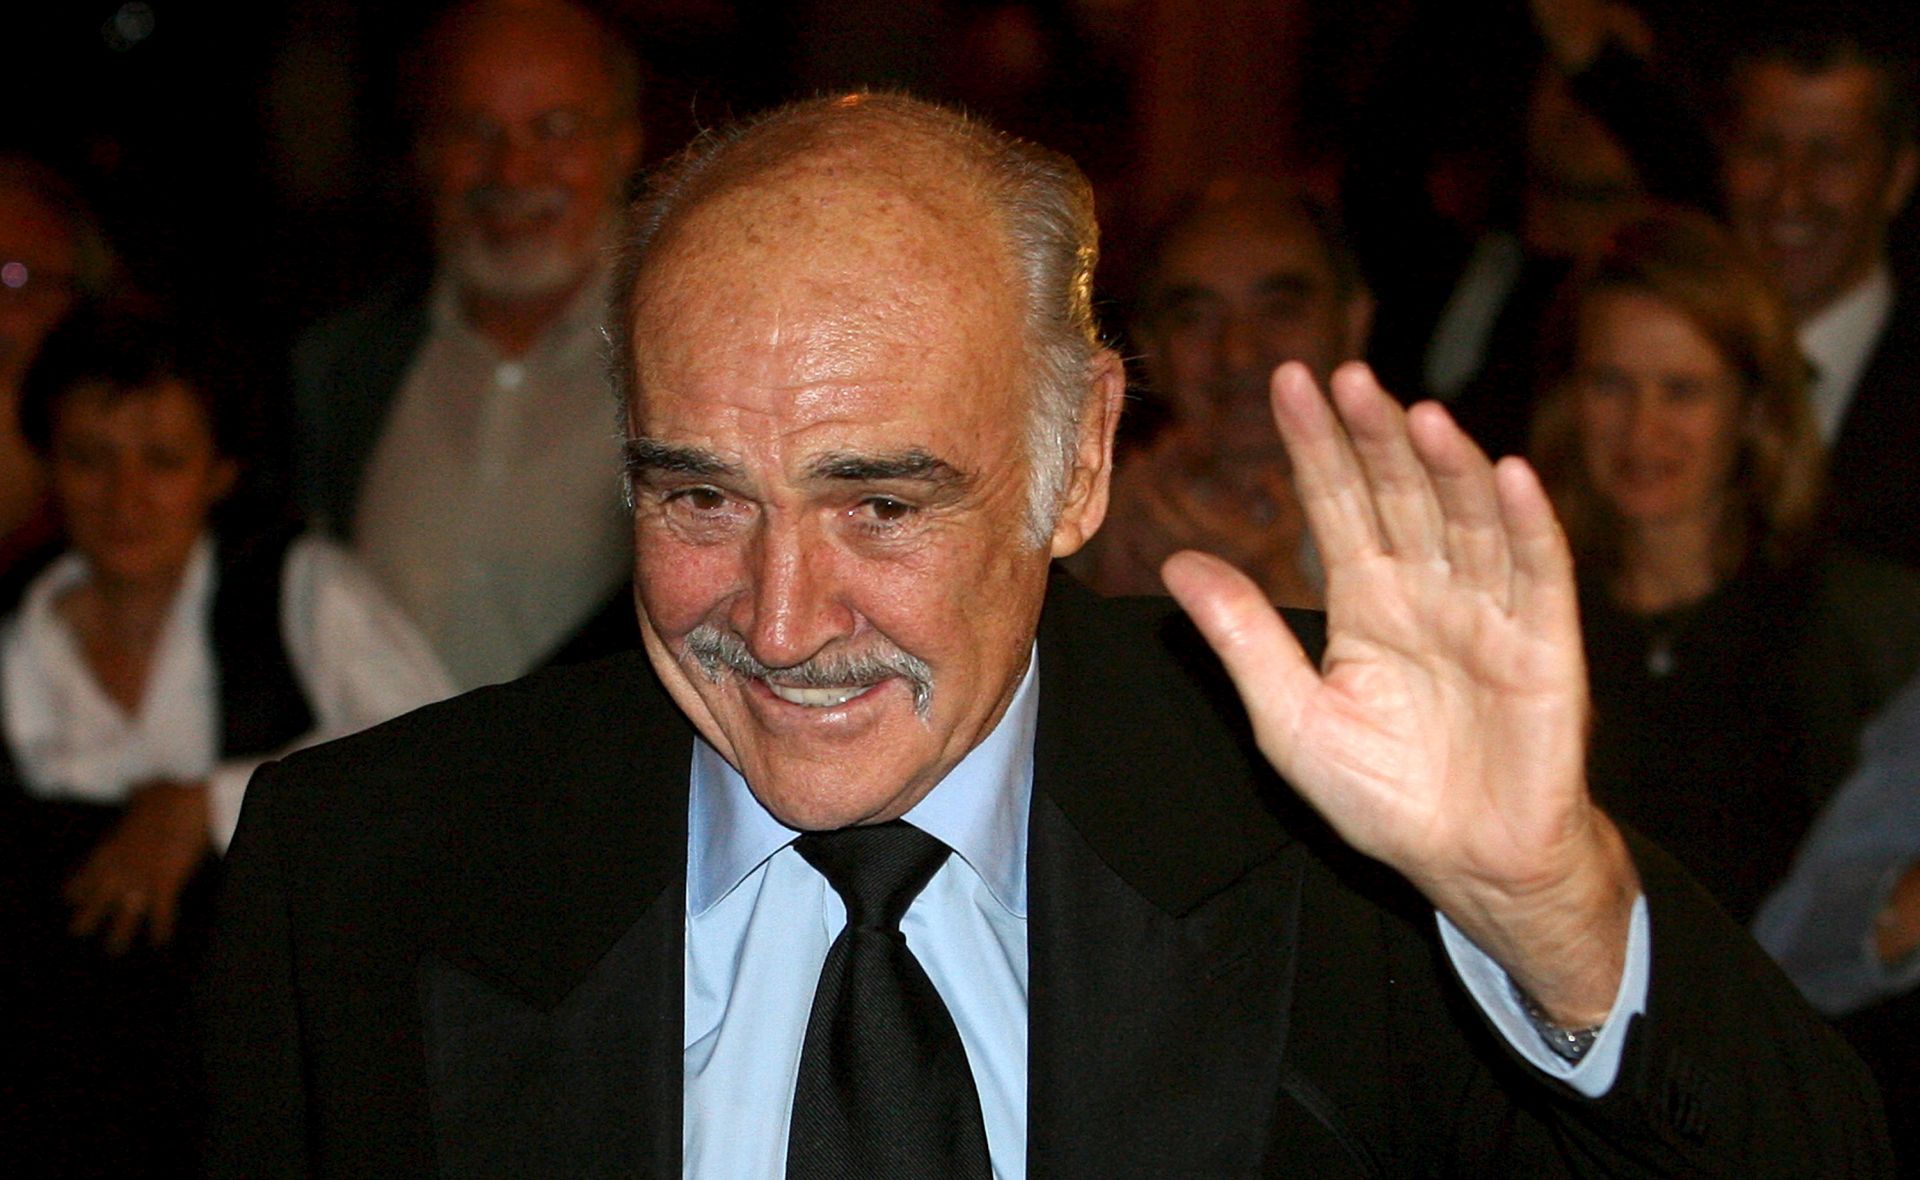 epa08788195 (FILE) - Scottish actor Sean Connery arrives at Rome's Opera Theatre to receive the 'Marco Aurelio' award on the eve of the start of the first Rome International Film Feast in Rome, Italy, 12 October 2006 (reissued 31 October 2020). According to media reports on 31 October 2020, Sean Connery has died aged 90.  EPA/CLAUDIO PERI